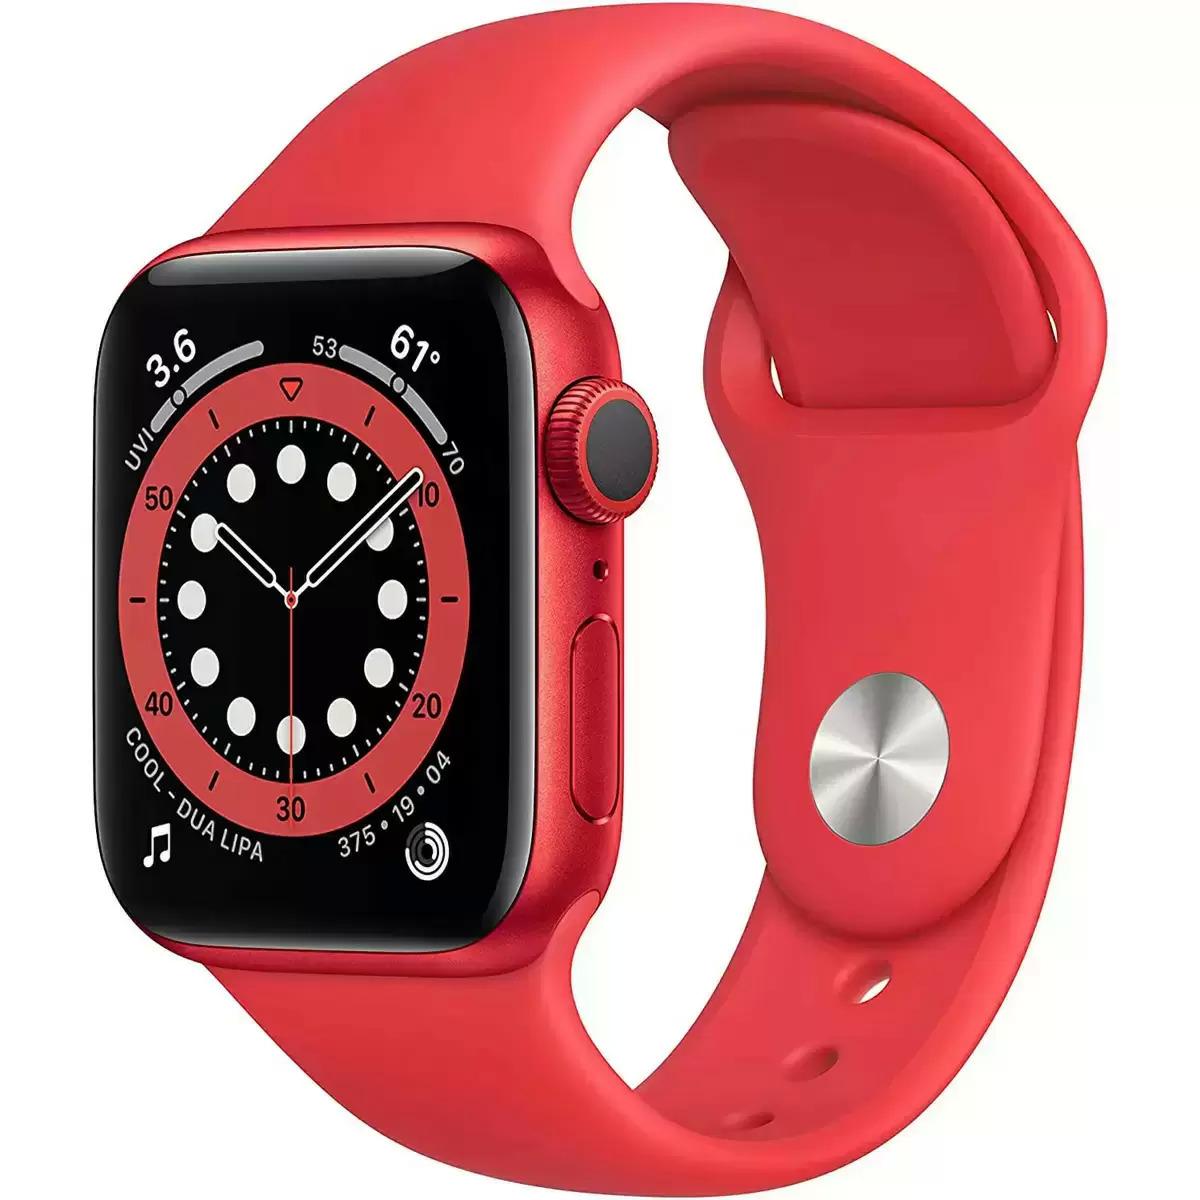 Apple Watch Series 6 40mm Product Red Smartwatch for $249 Shipped